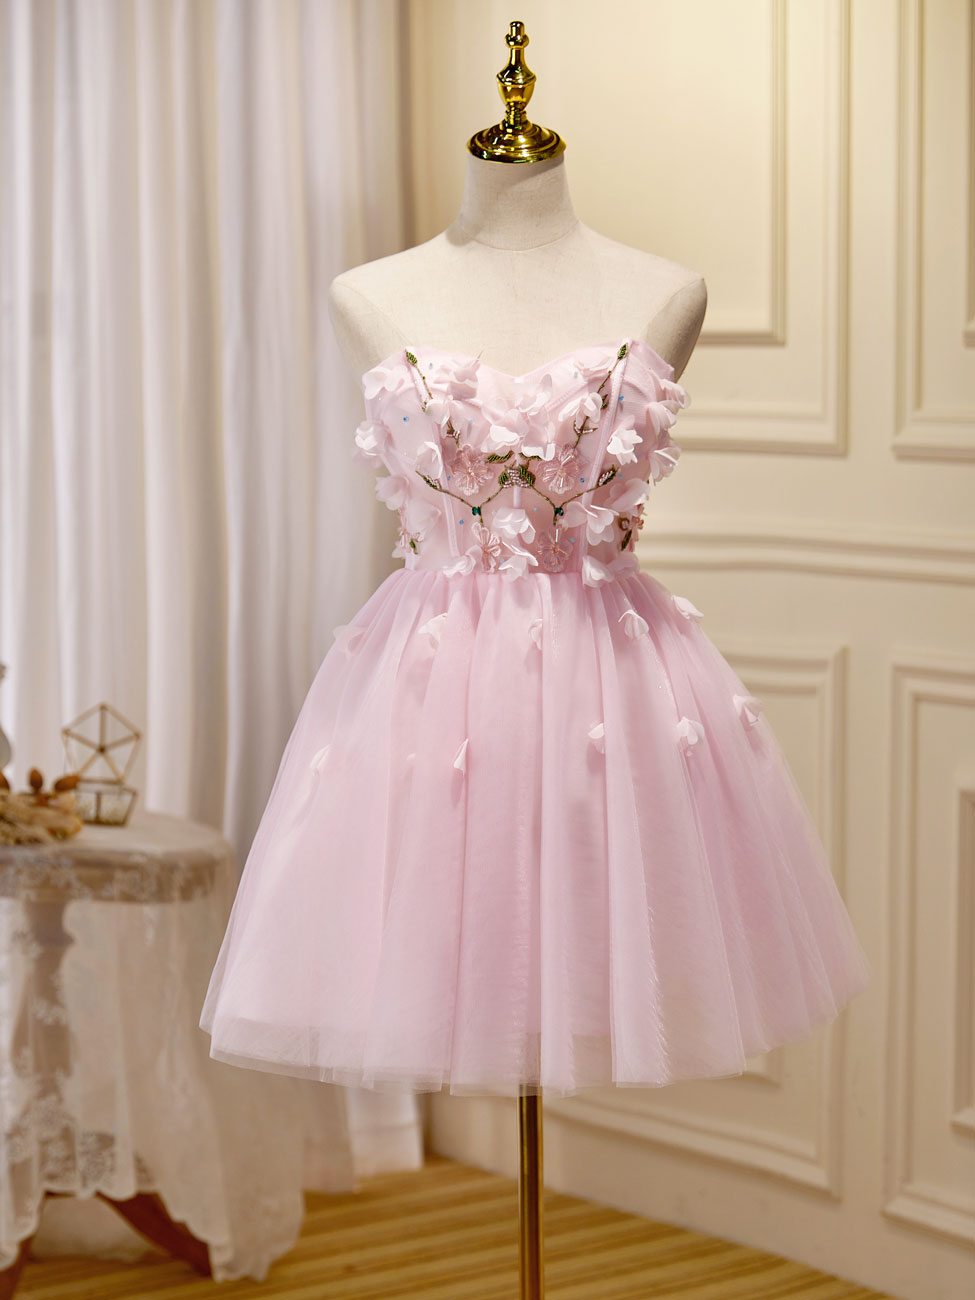 Mini/Short Pink Prom Dress Outfits For Girls, Cute Pink Homecoming Dresses For Black girls with Beading Applique